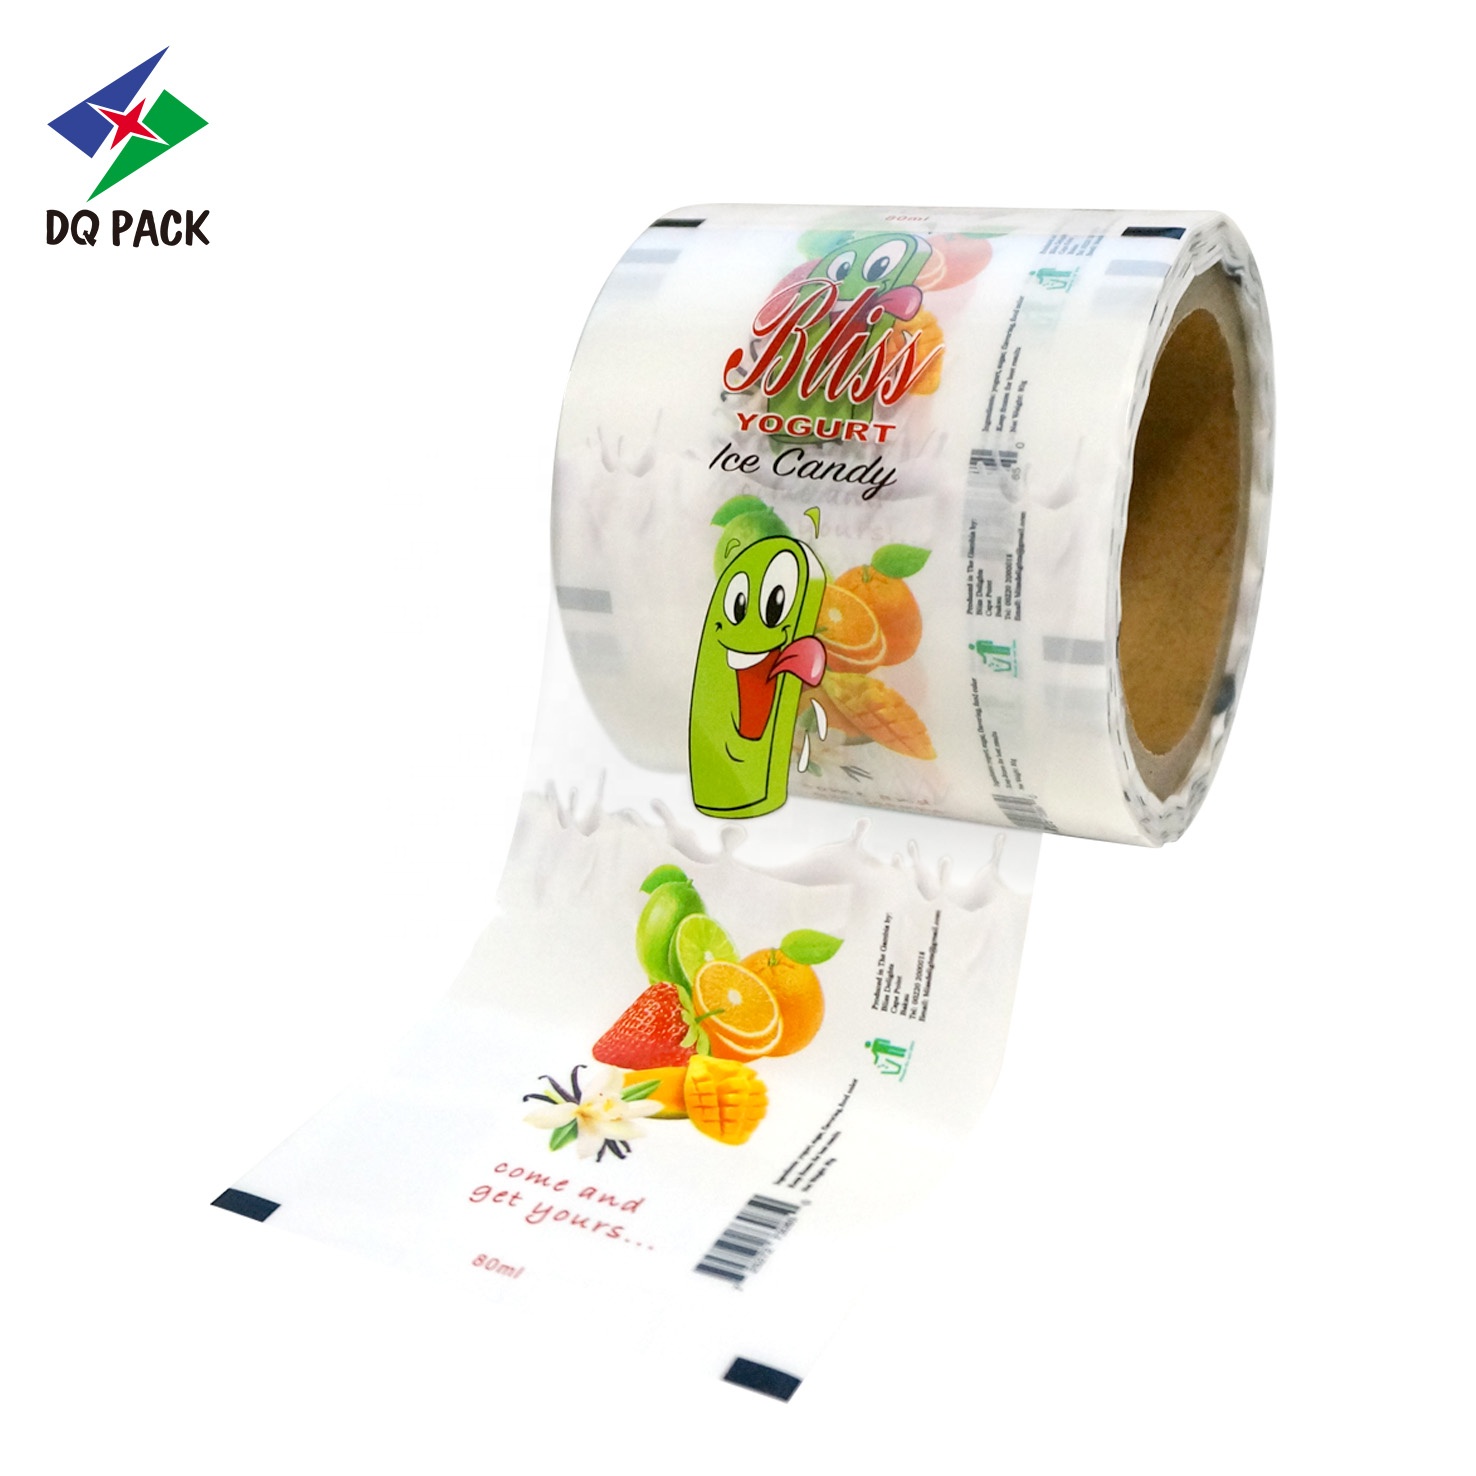 DQ PACK Custom Printing Flexible PA/PE Ice Candy Packaging Film